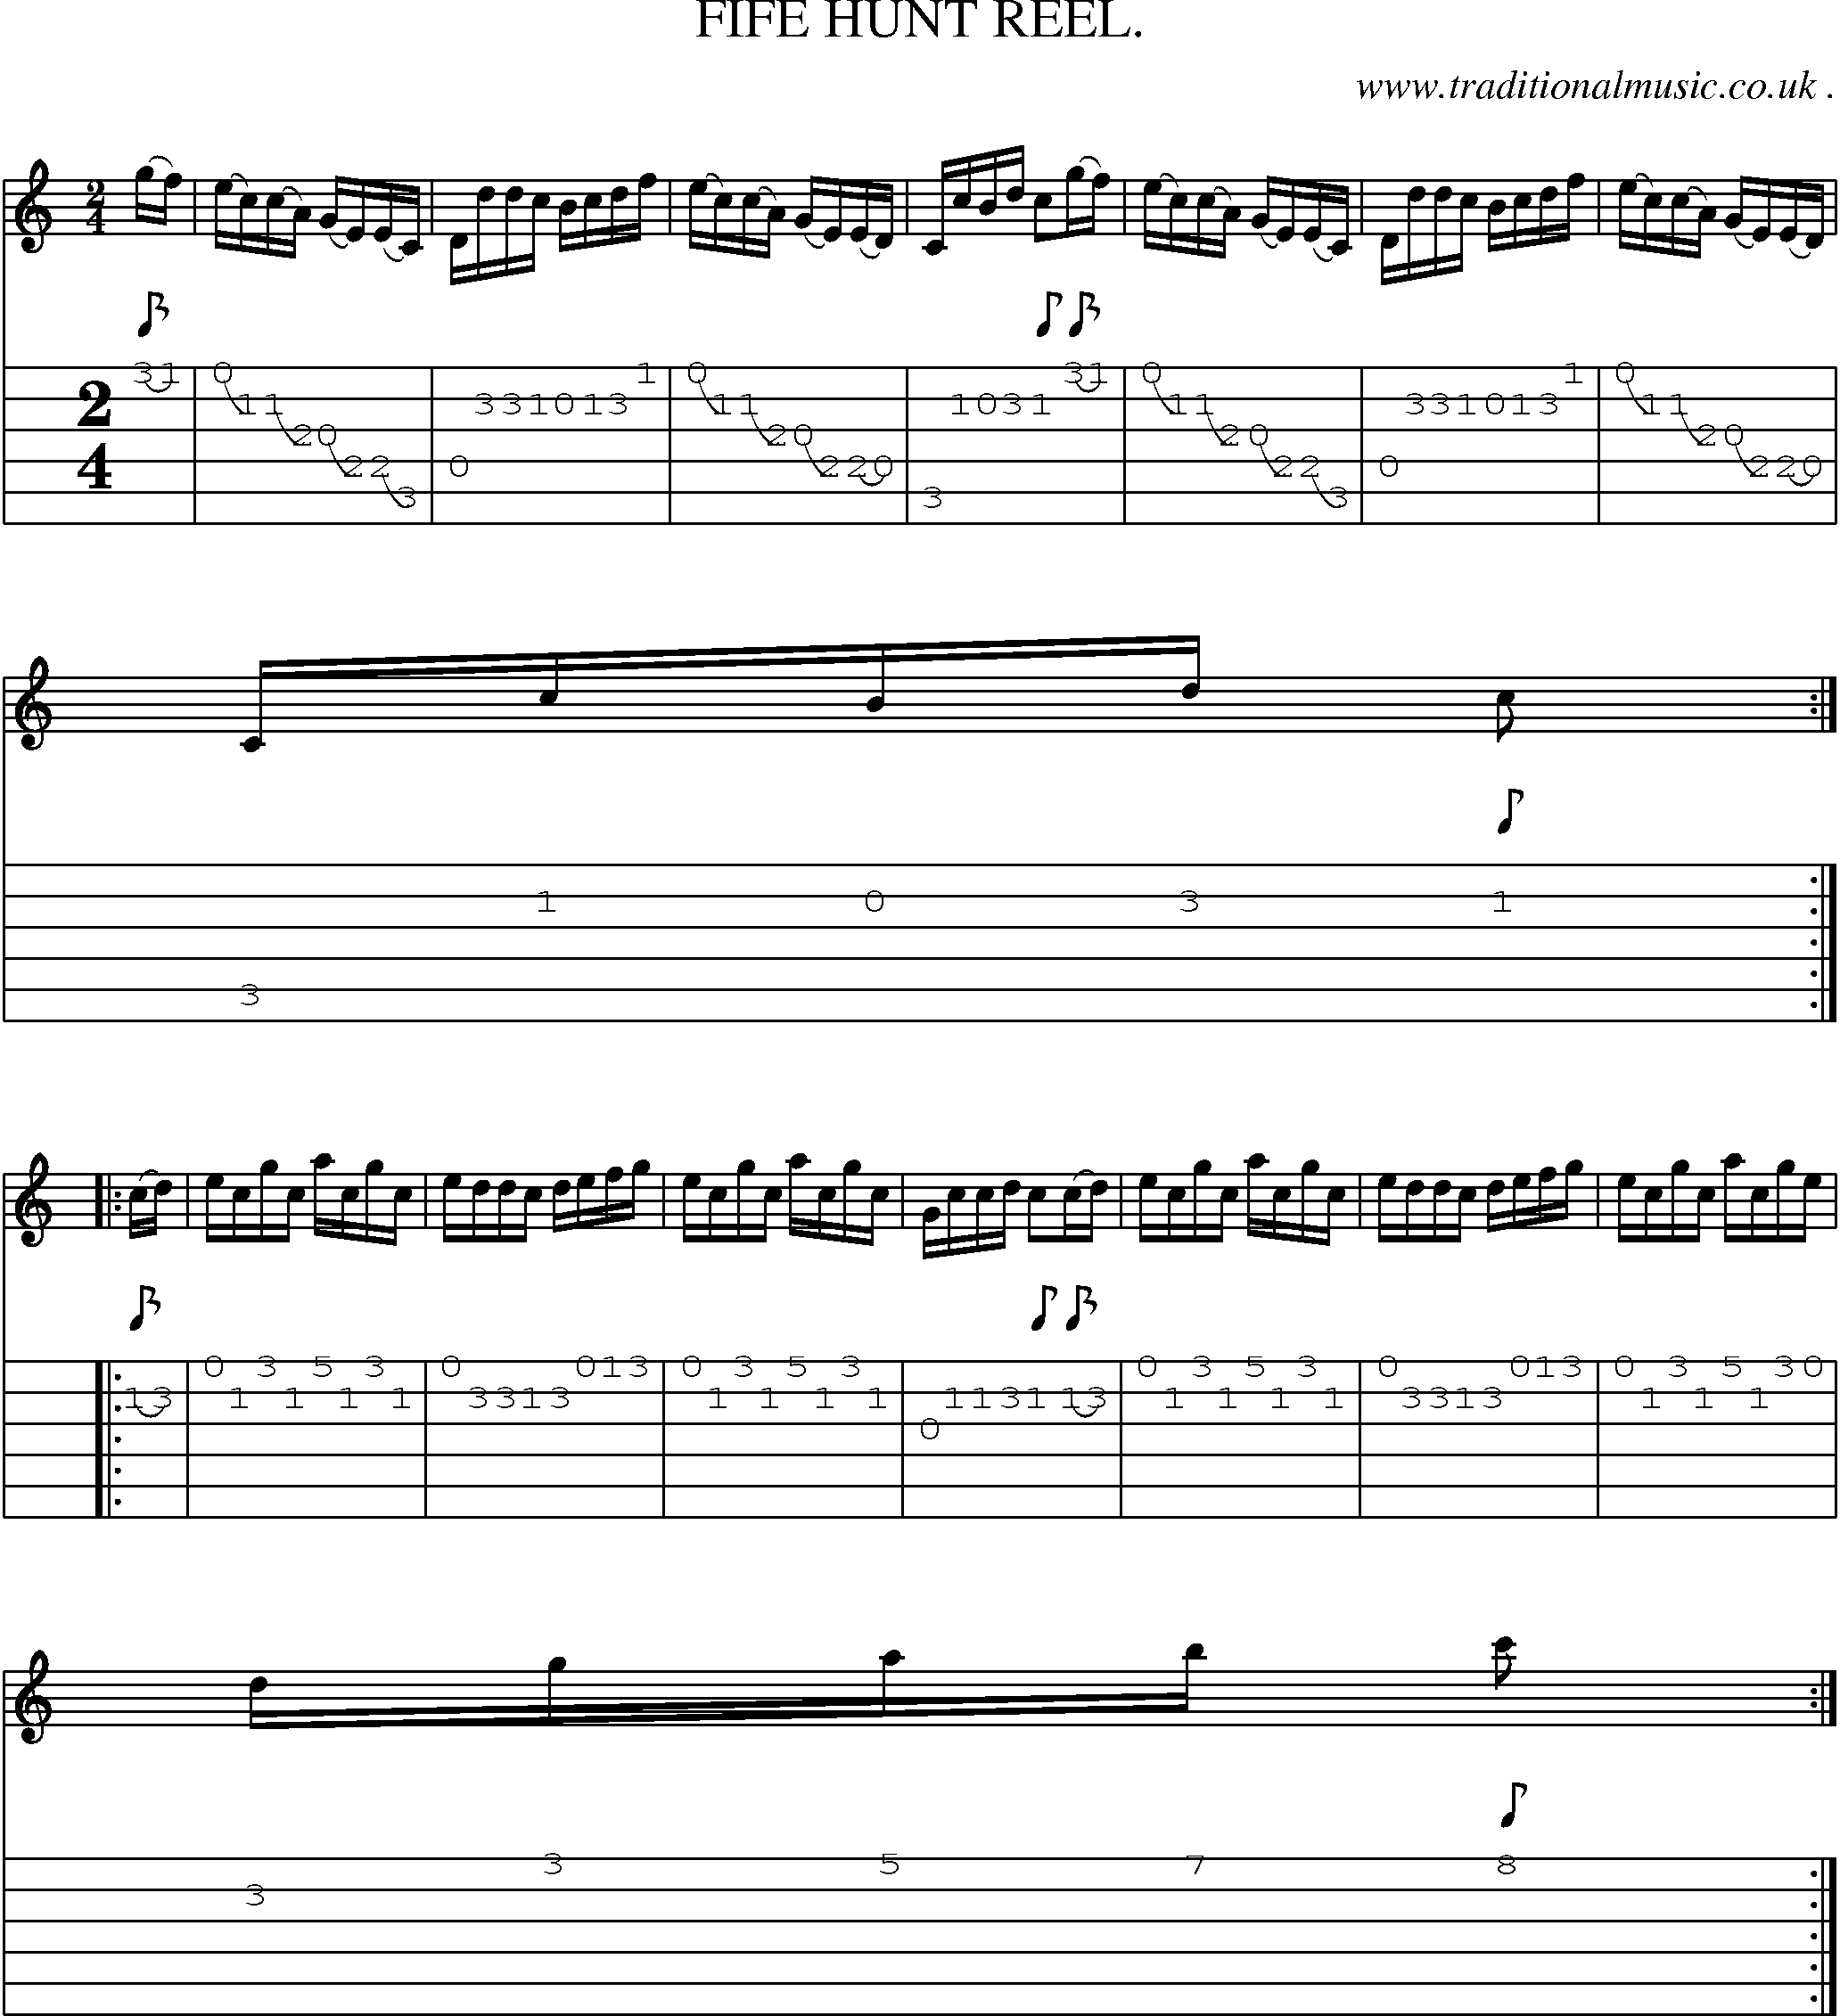 Sheet-Music and Guitar Tabs for Fife Hunt Reel